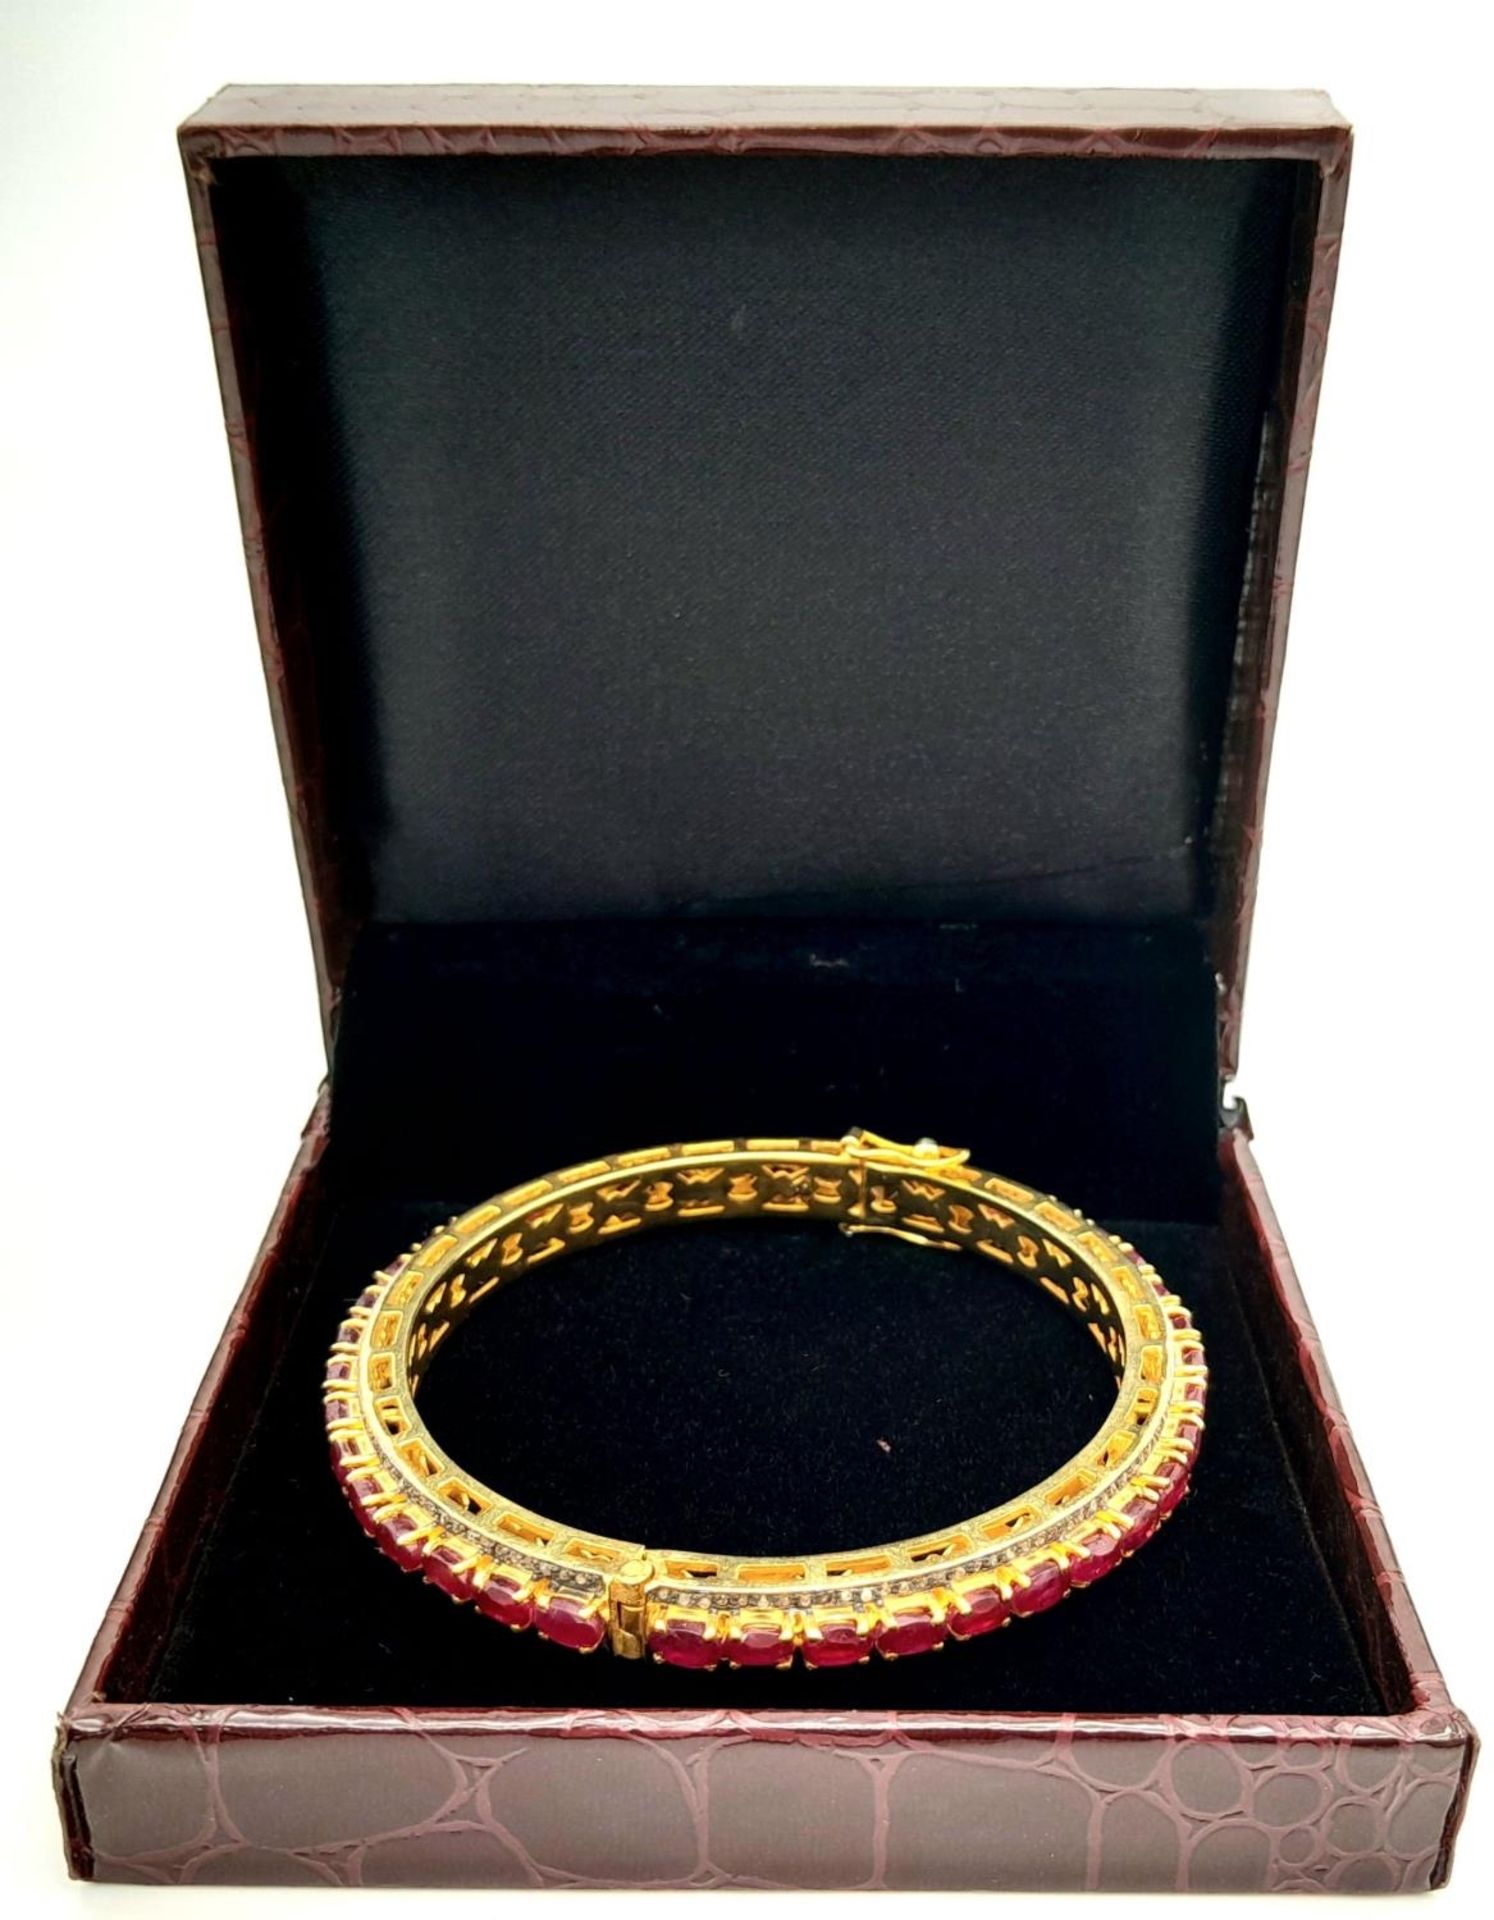 A Ruby Gemstone Bangle Bracelet with Old Cut Diamond Surround. Rubies - 12ctw. Set in 925 silver. - Image 6 of 7